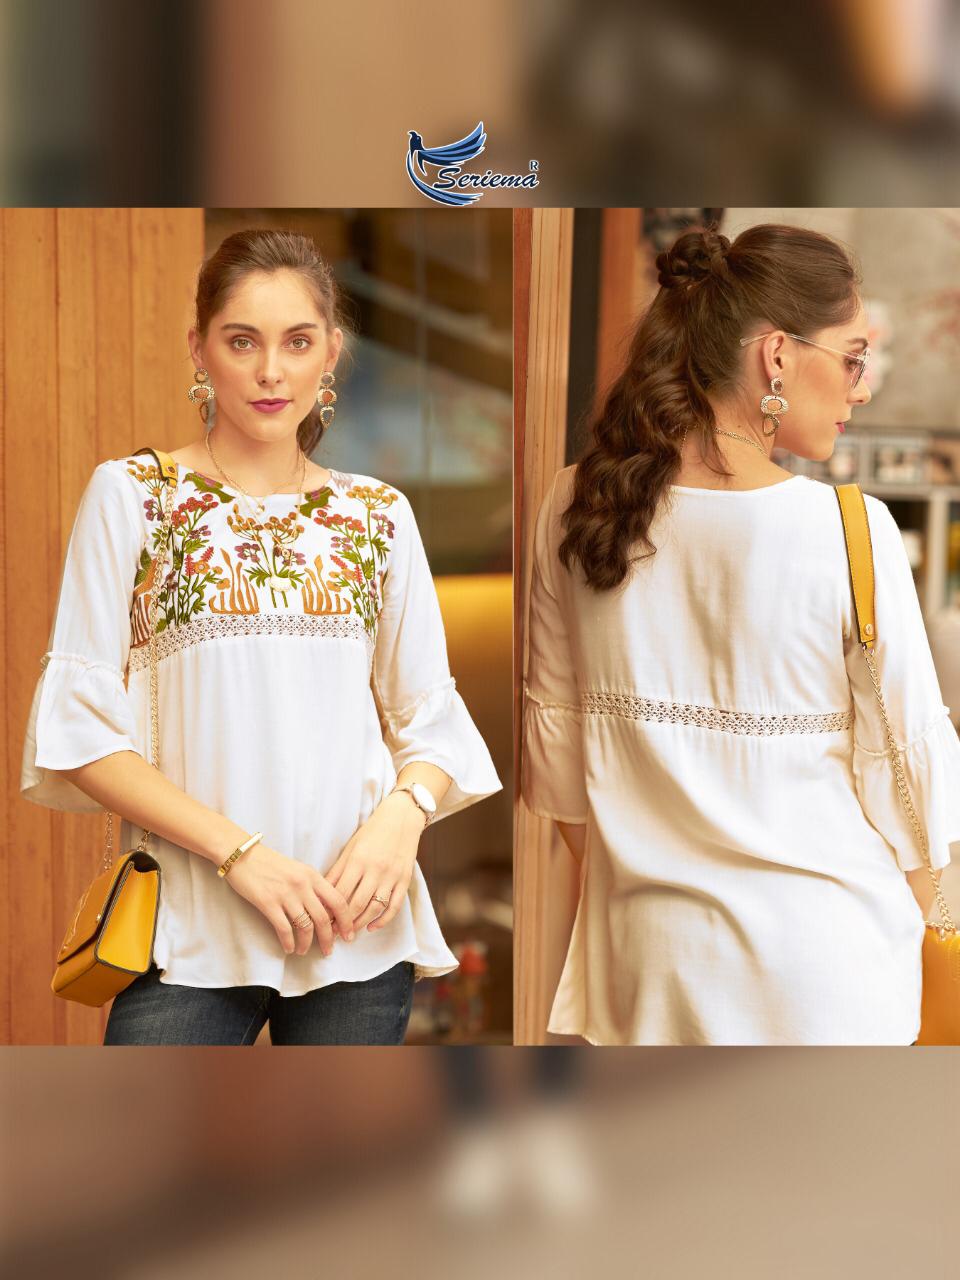 Seriema Glazier Nx Catalogue Rayon Stylish Embroidery Short Tops Collection Wholesale Rate